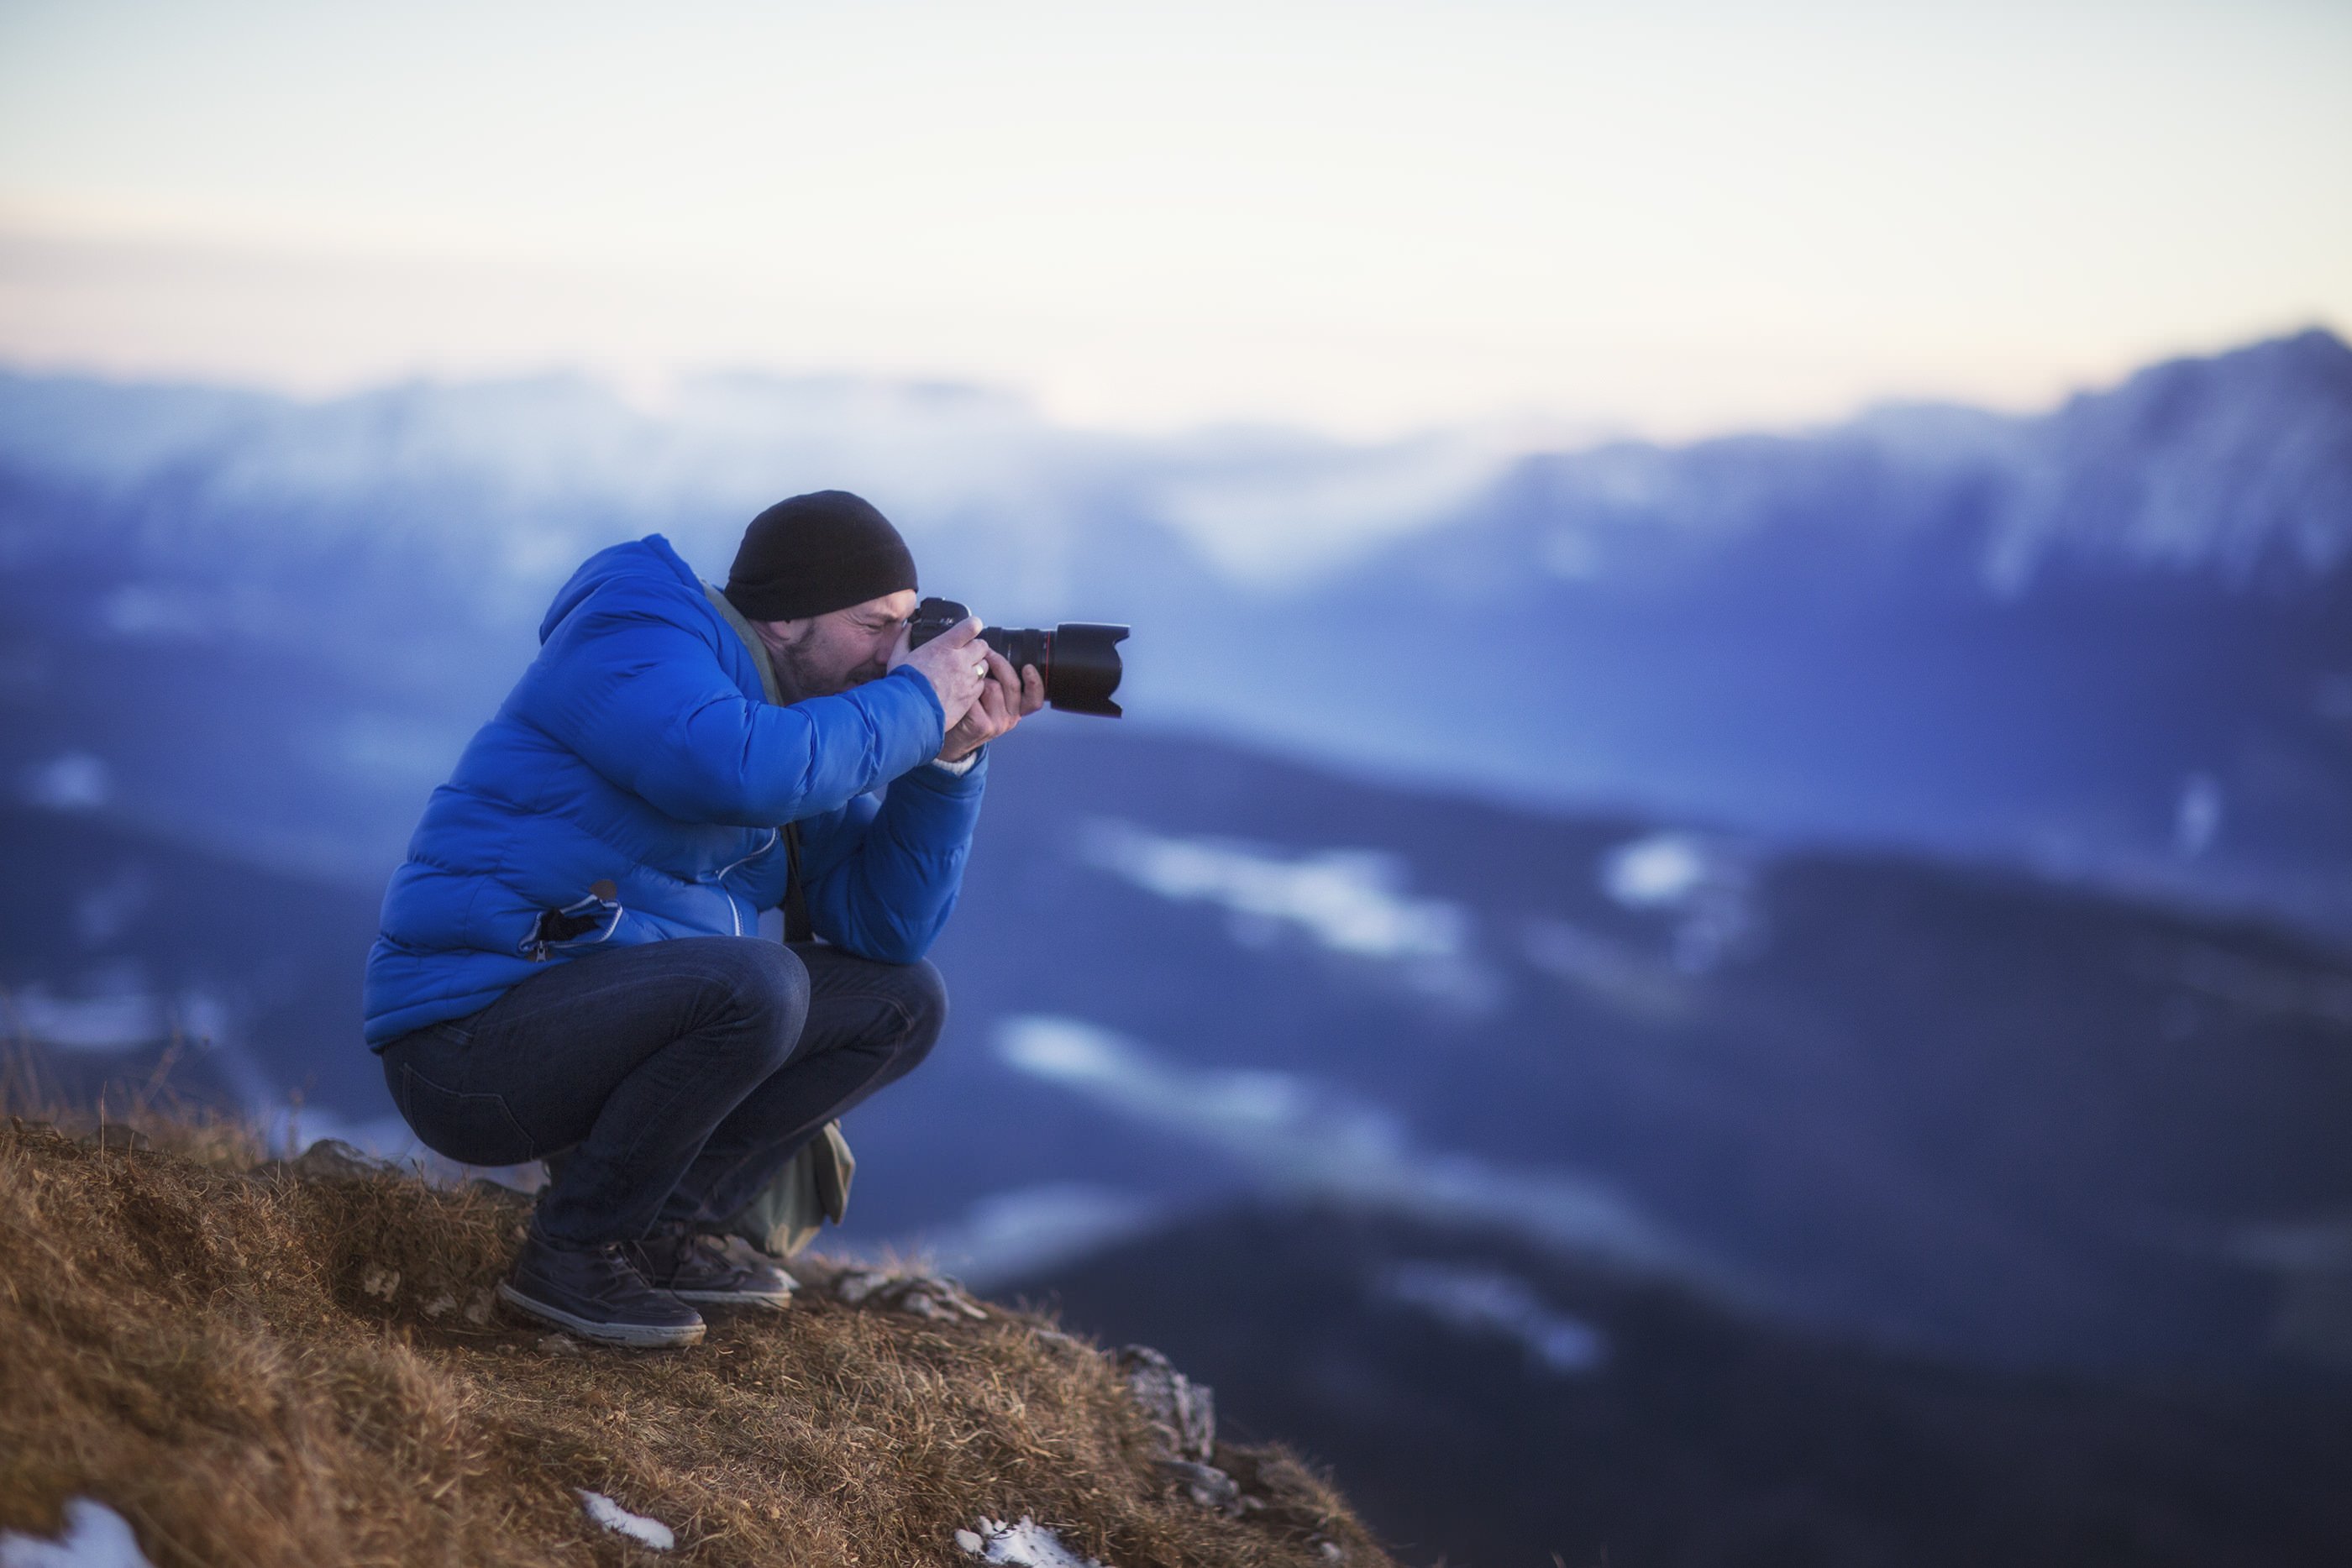 Want to be a Better Photographer? Do These Four Things